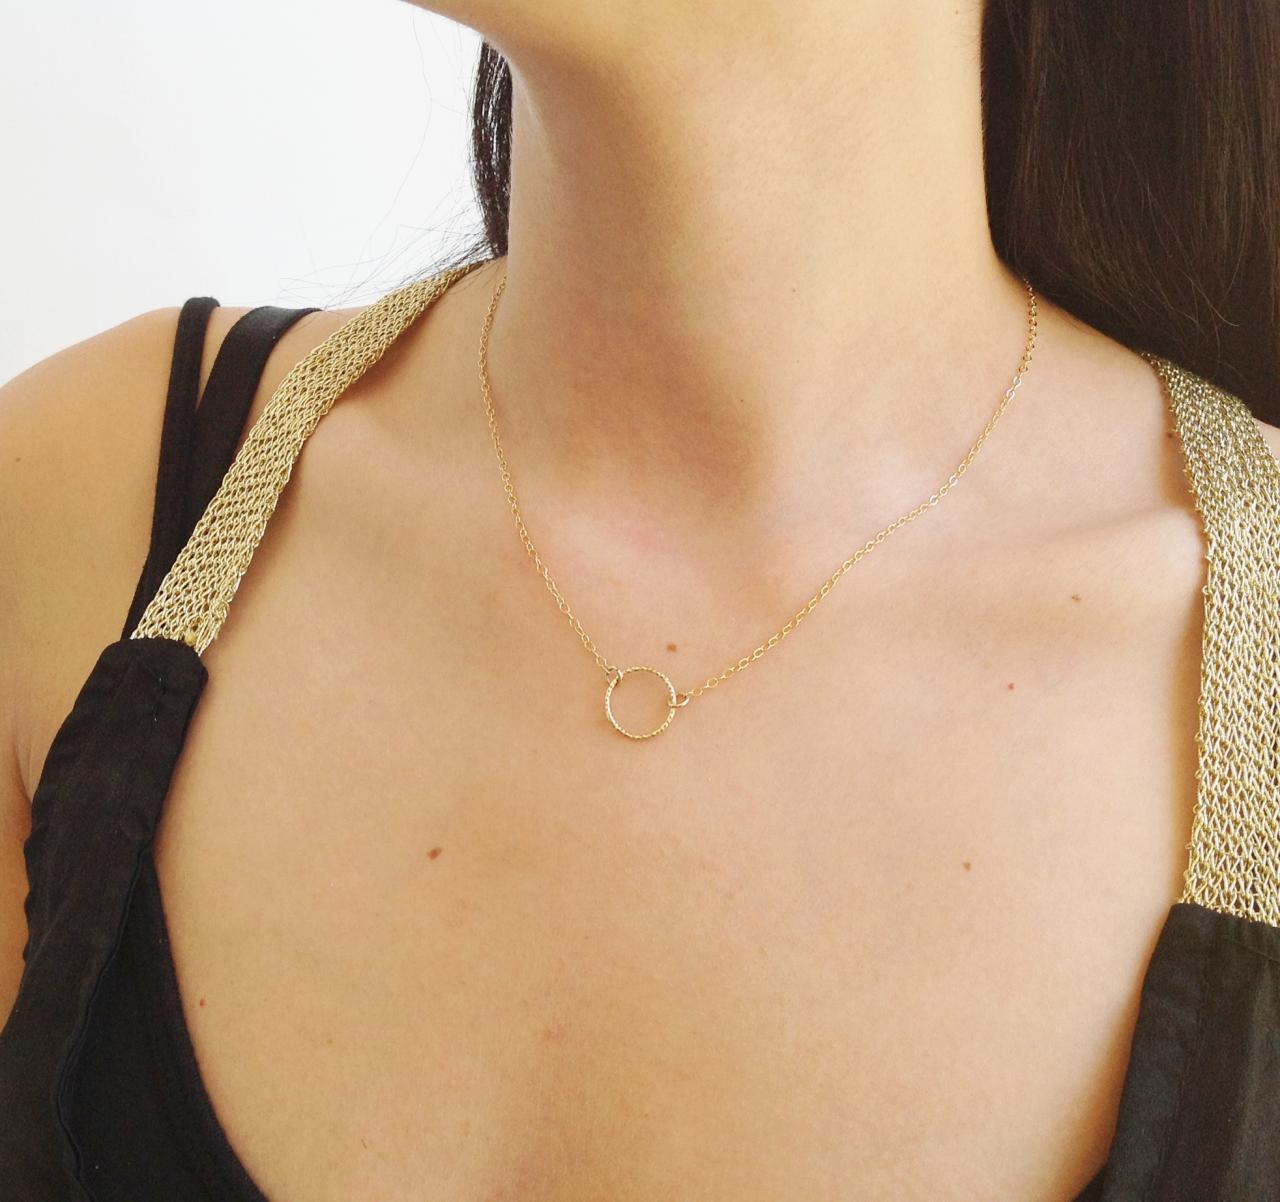 Gold Necklace, Circle Necklace, Everyday Necklace, Karma Necklace, Simple Everyday Necklace - 10050